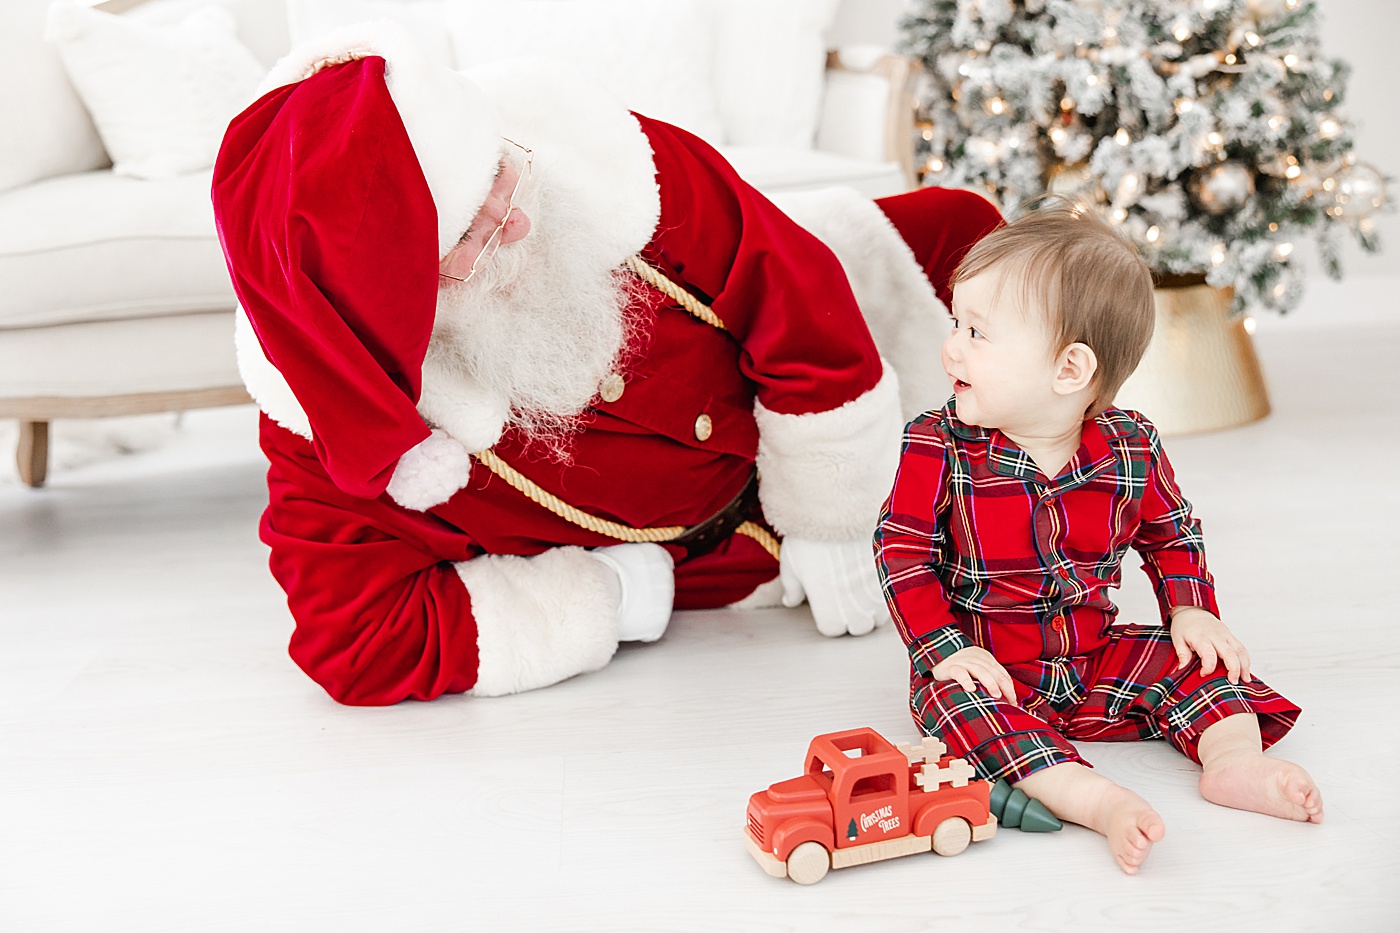 Baby's first Christmas and meeting Santa | Kristin Wood Photography